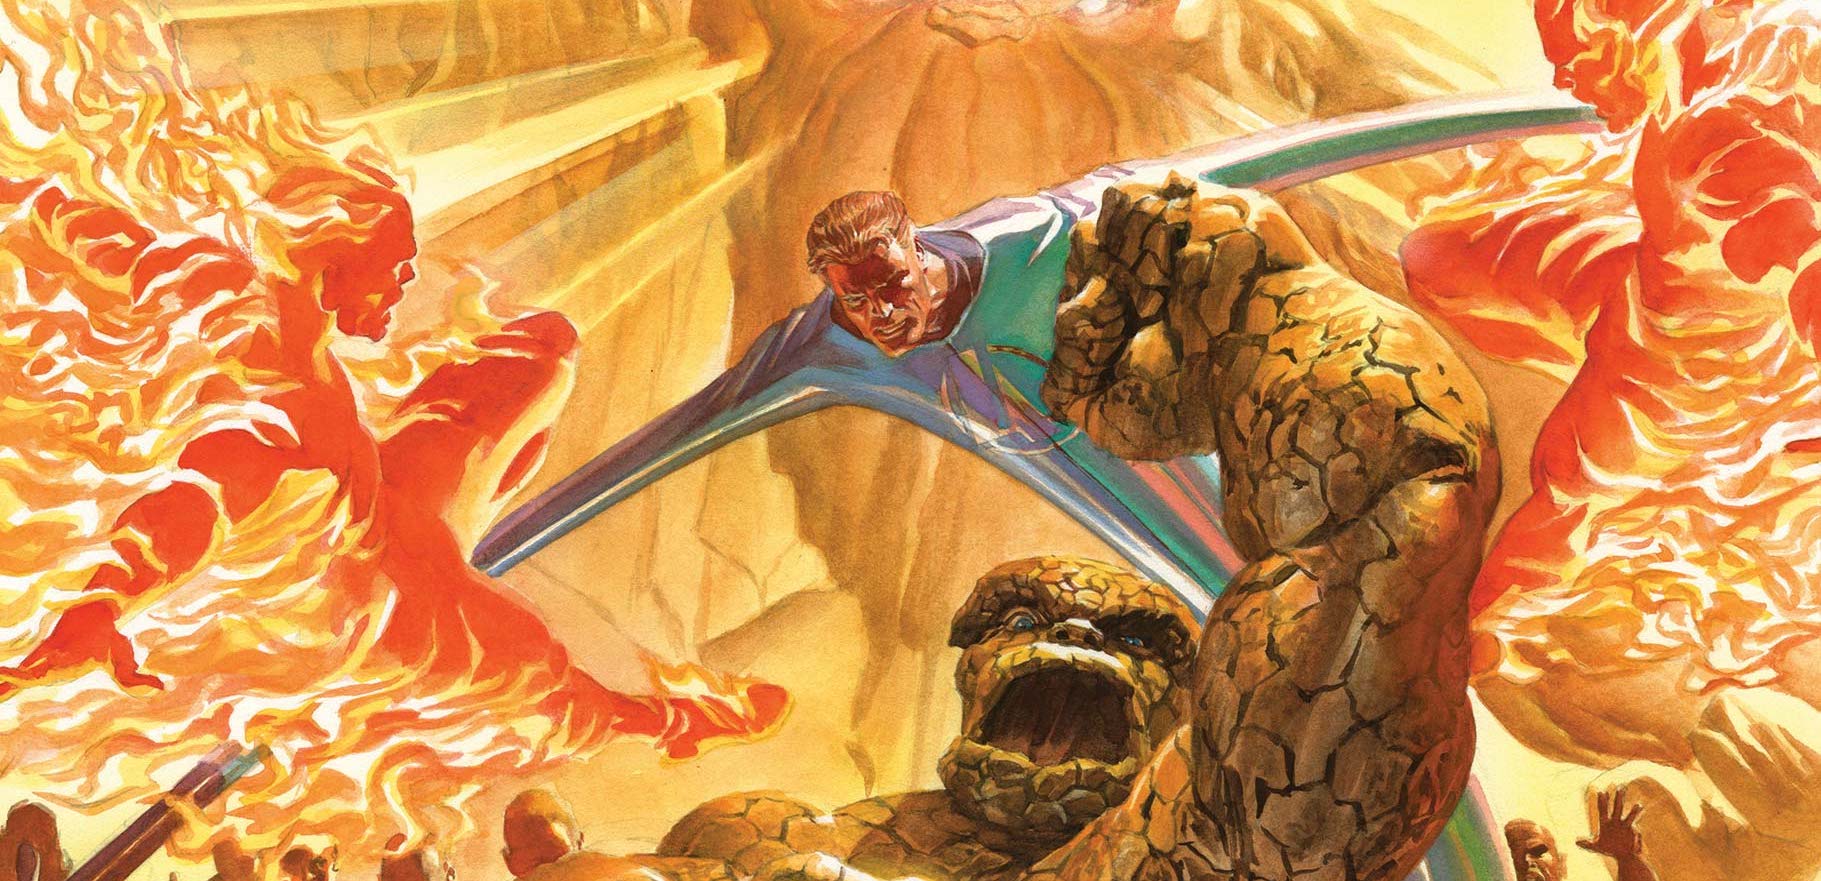 EXCLUSIVE Marvel Preview: Fantastic Four #9